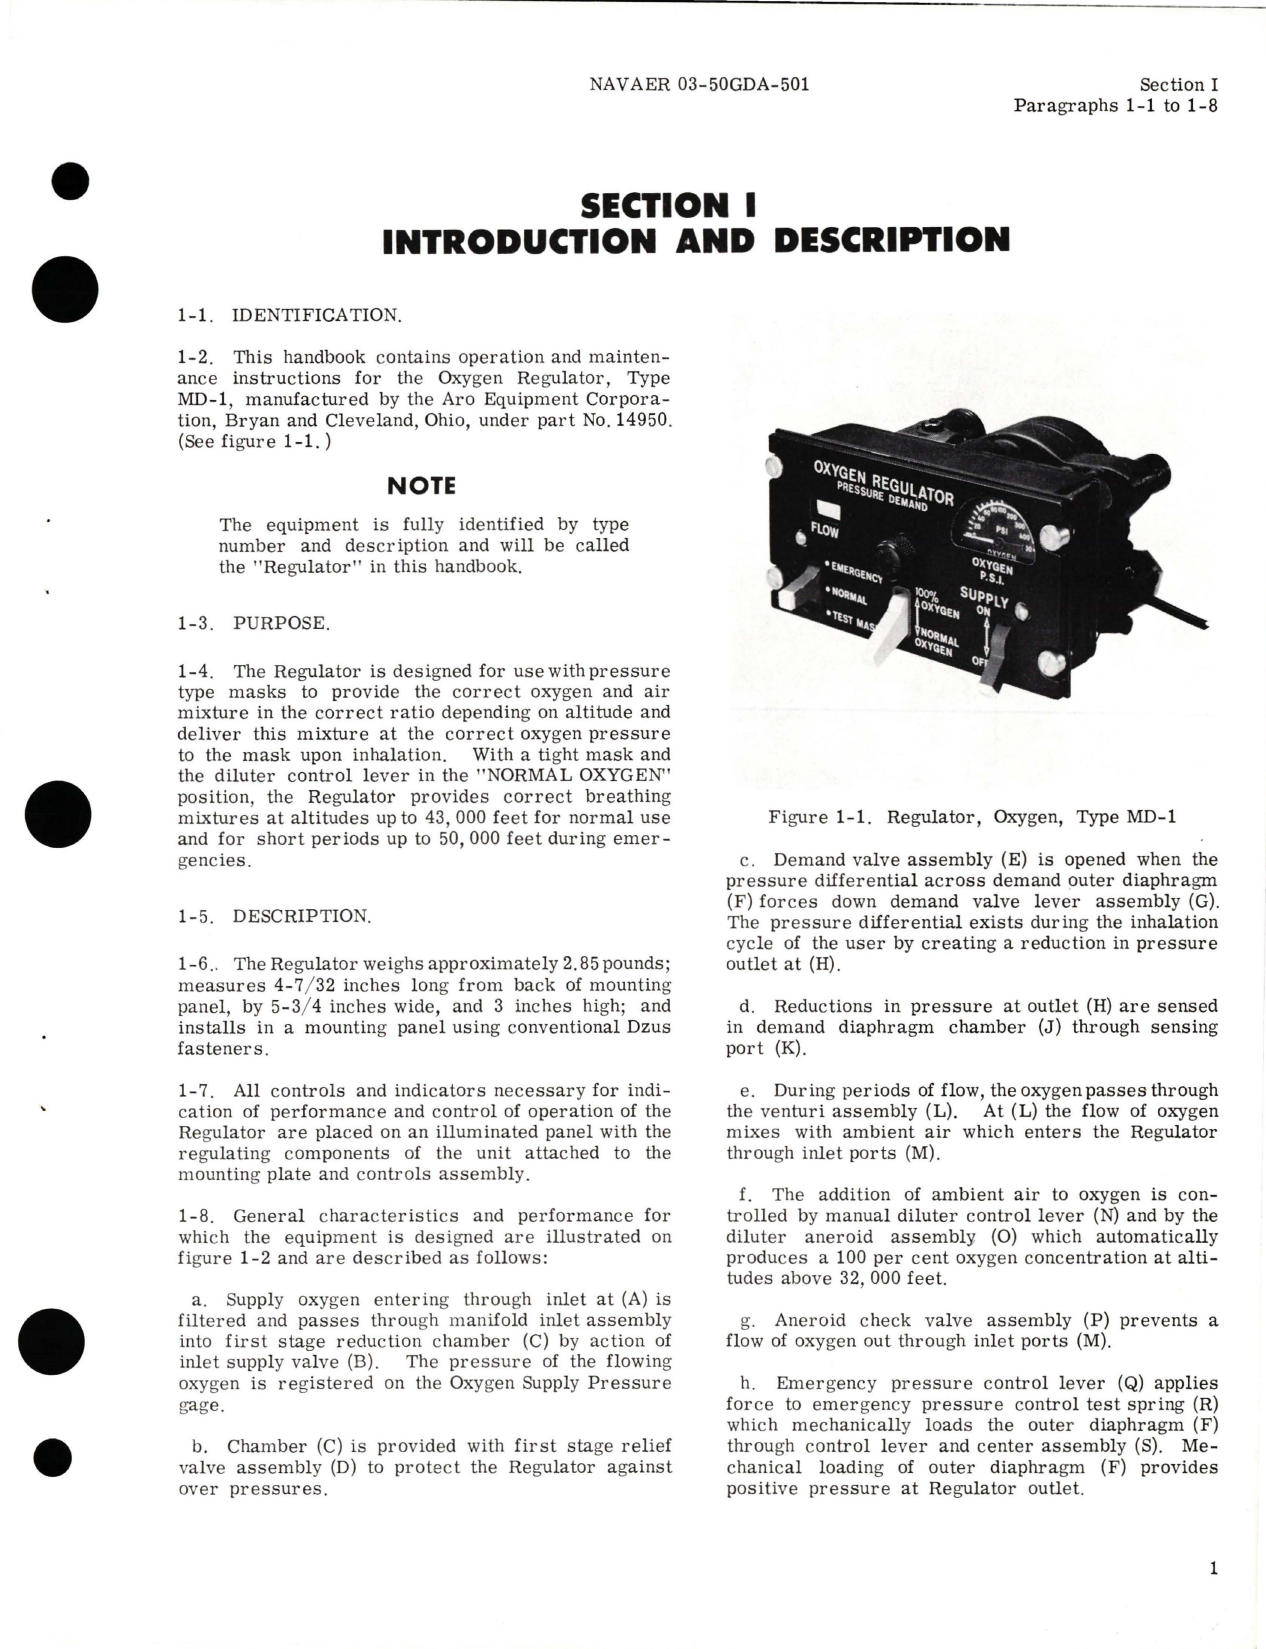 Sample page 5 from AirCorps Library document: Operation and Maintenance Instructions for Oxygen Regulator 